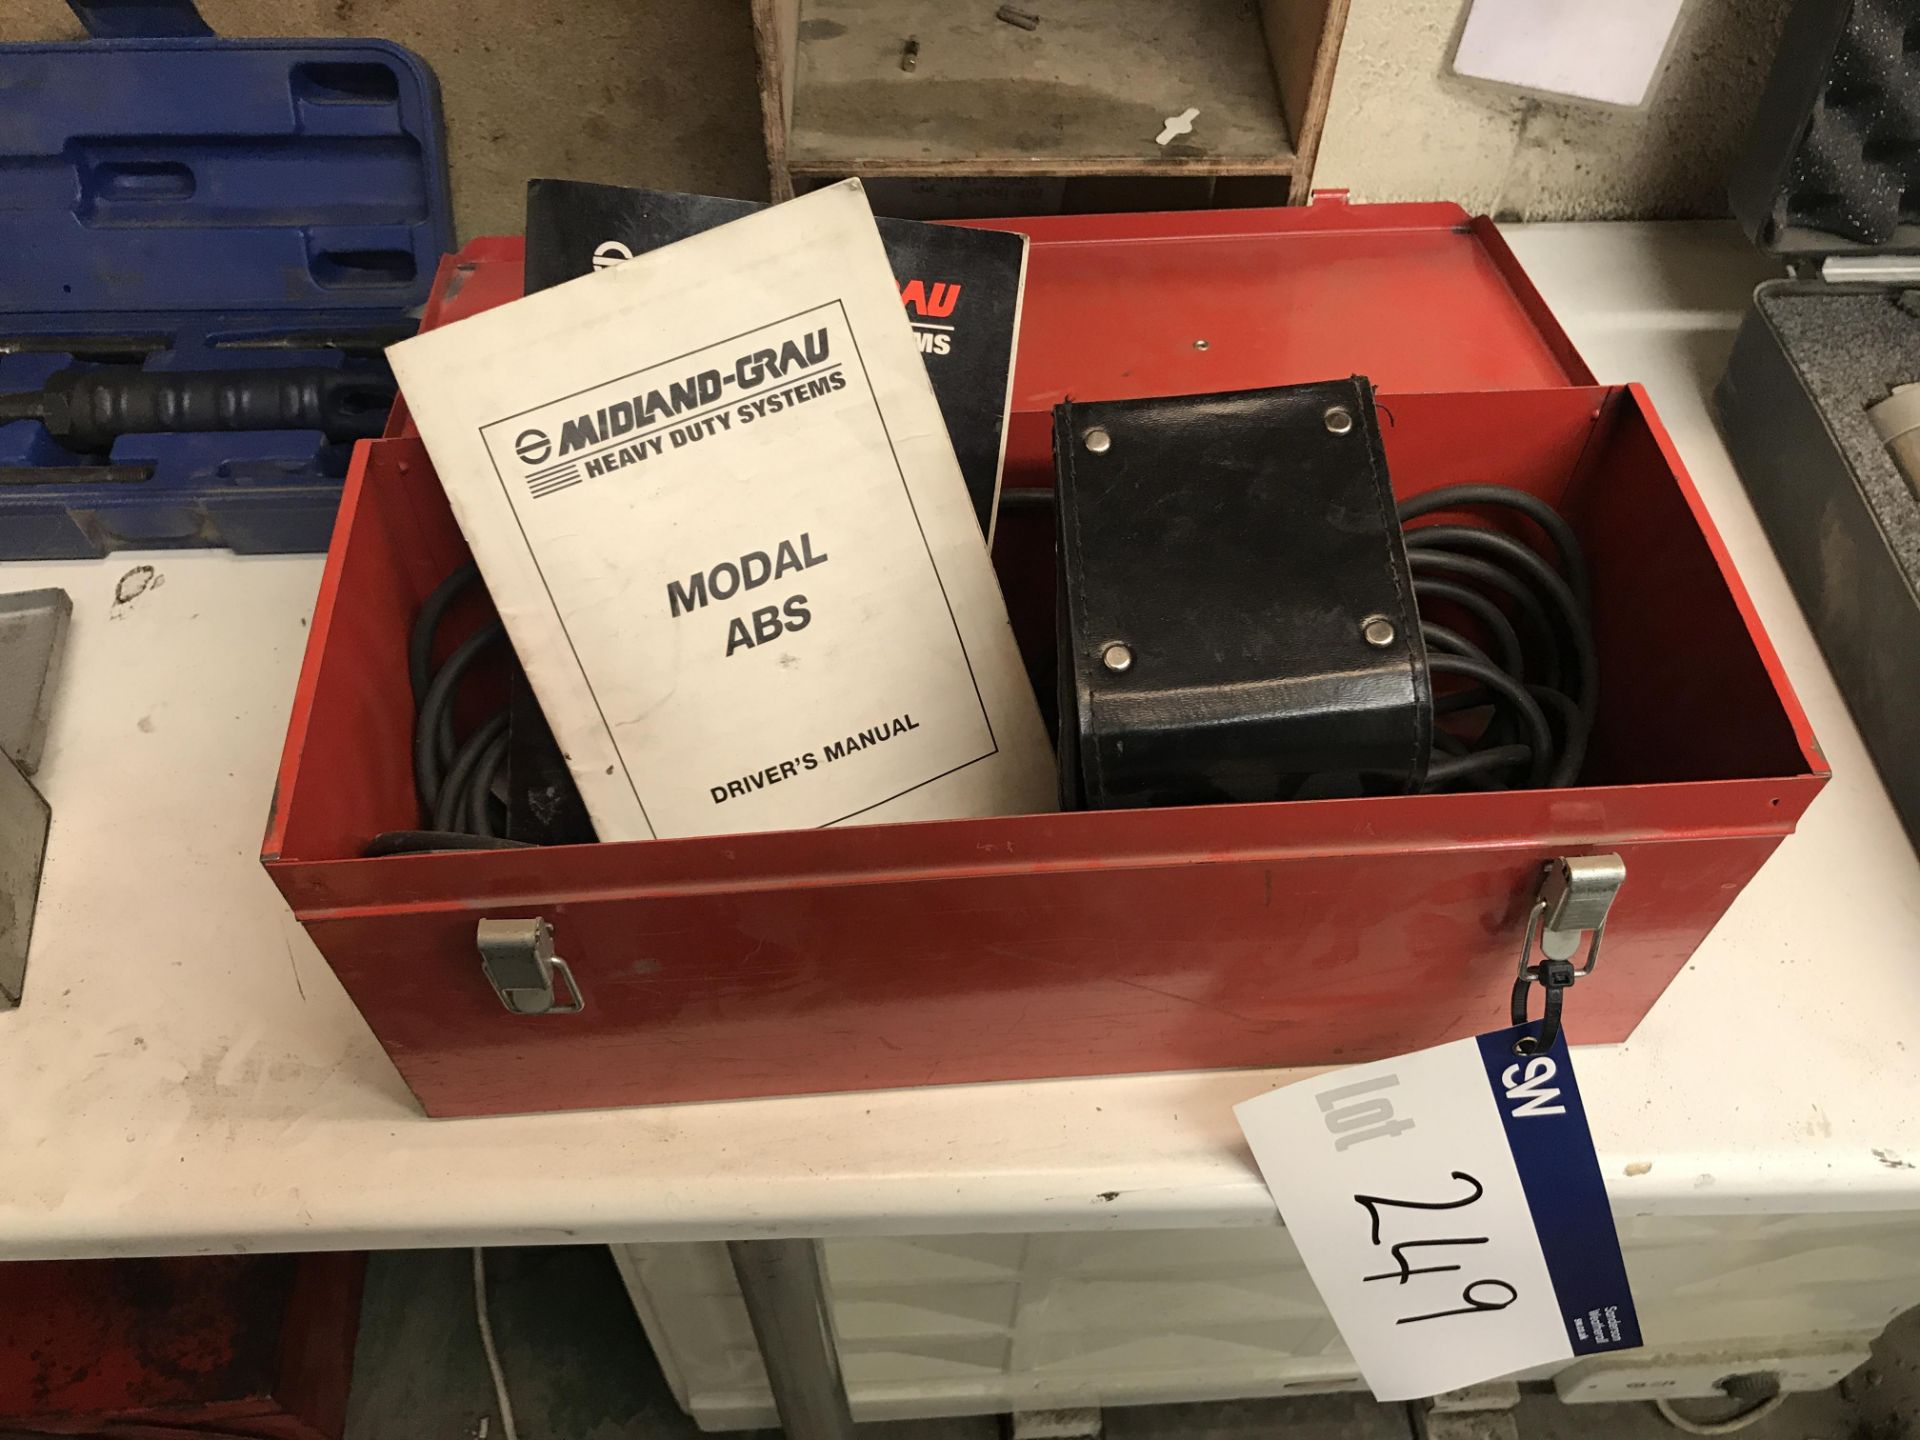 Midland-Grau Modal ABS Digital Display Unit, with carry case (lot located at Bedfords Limited (In